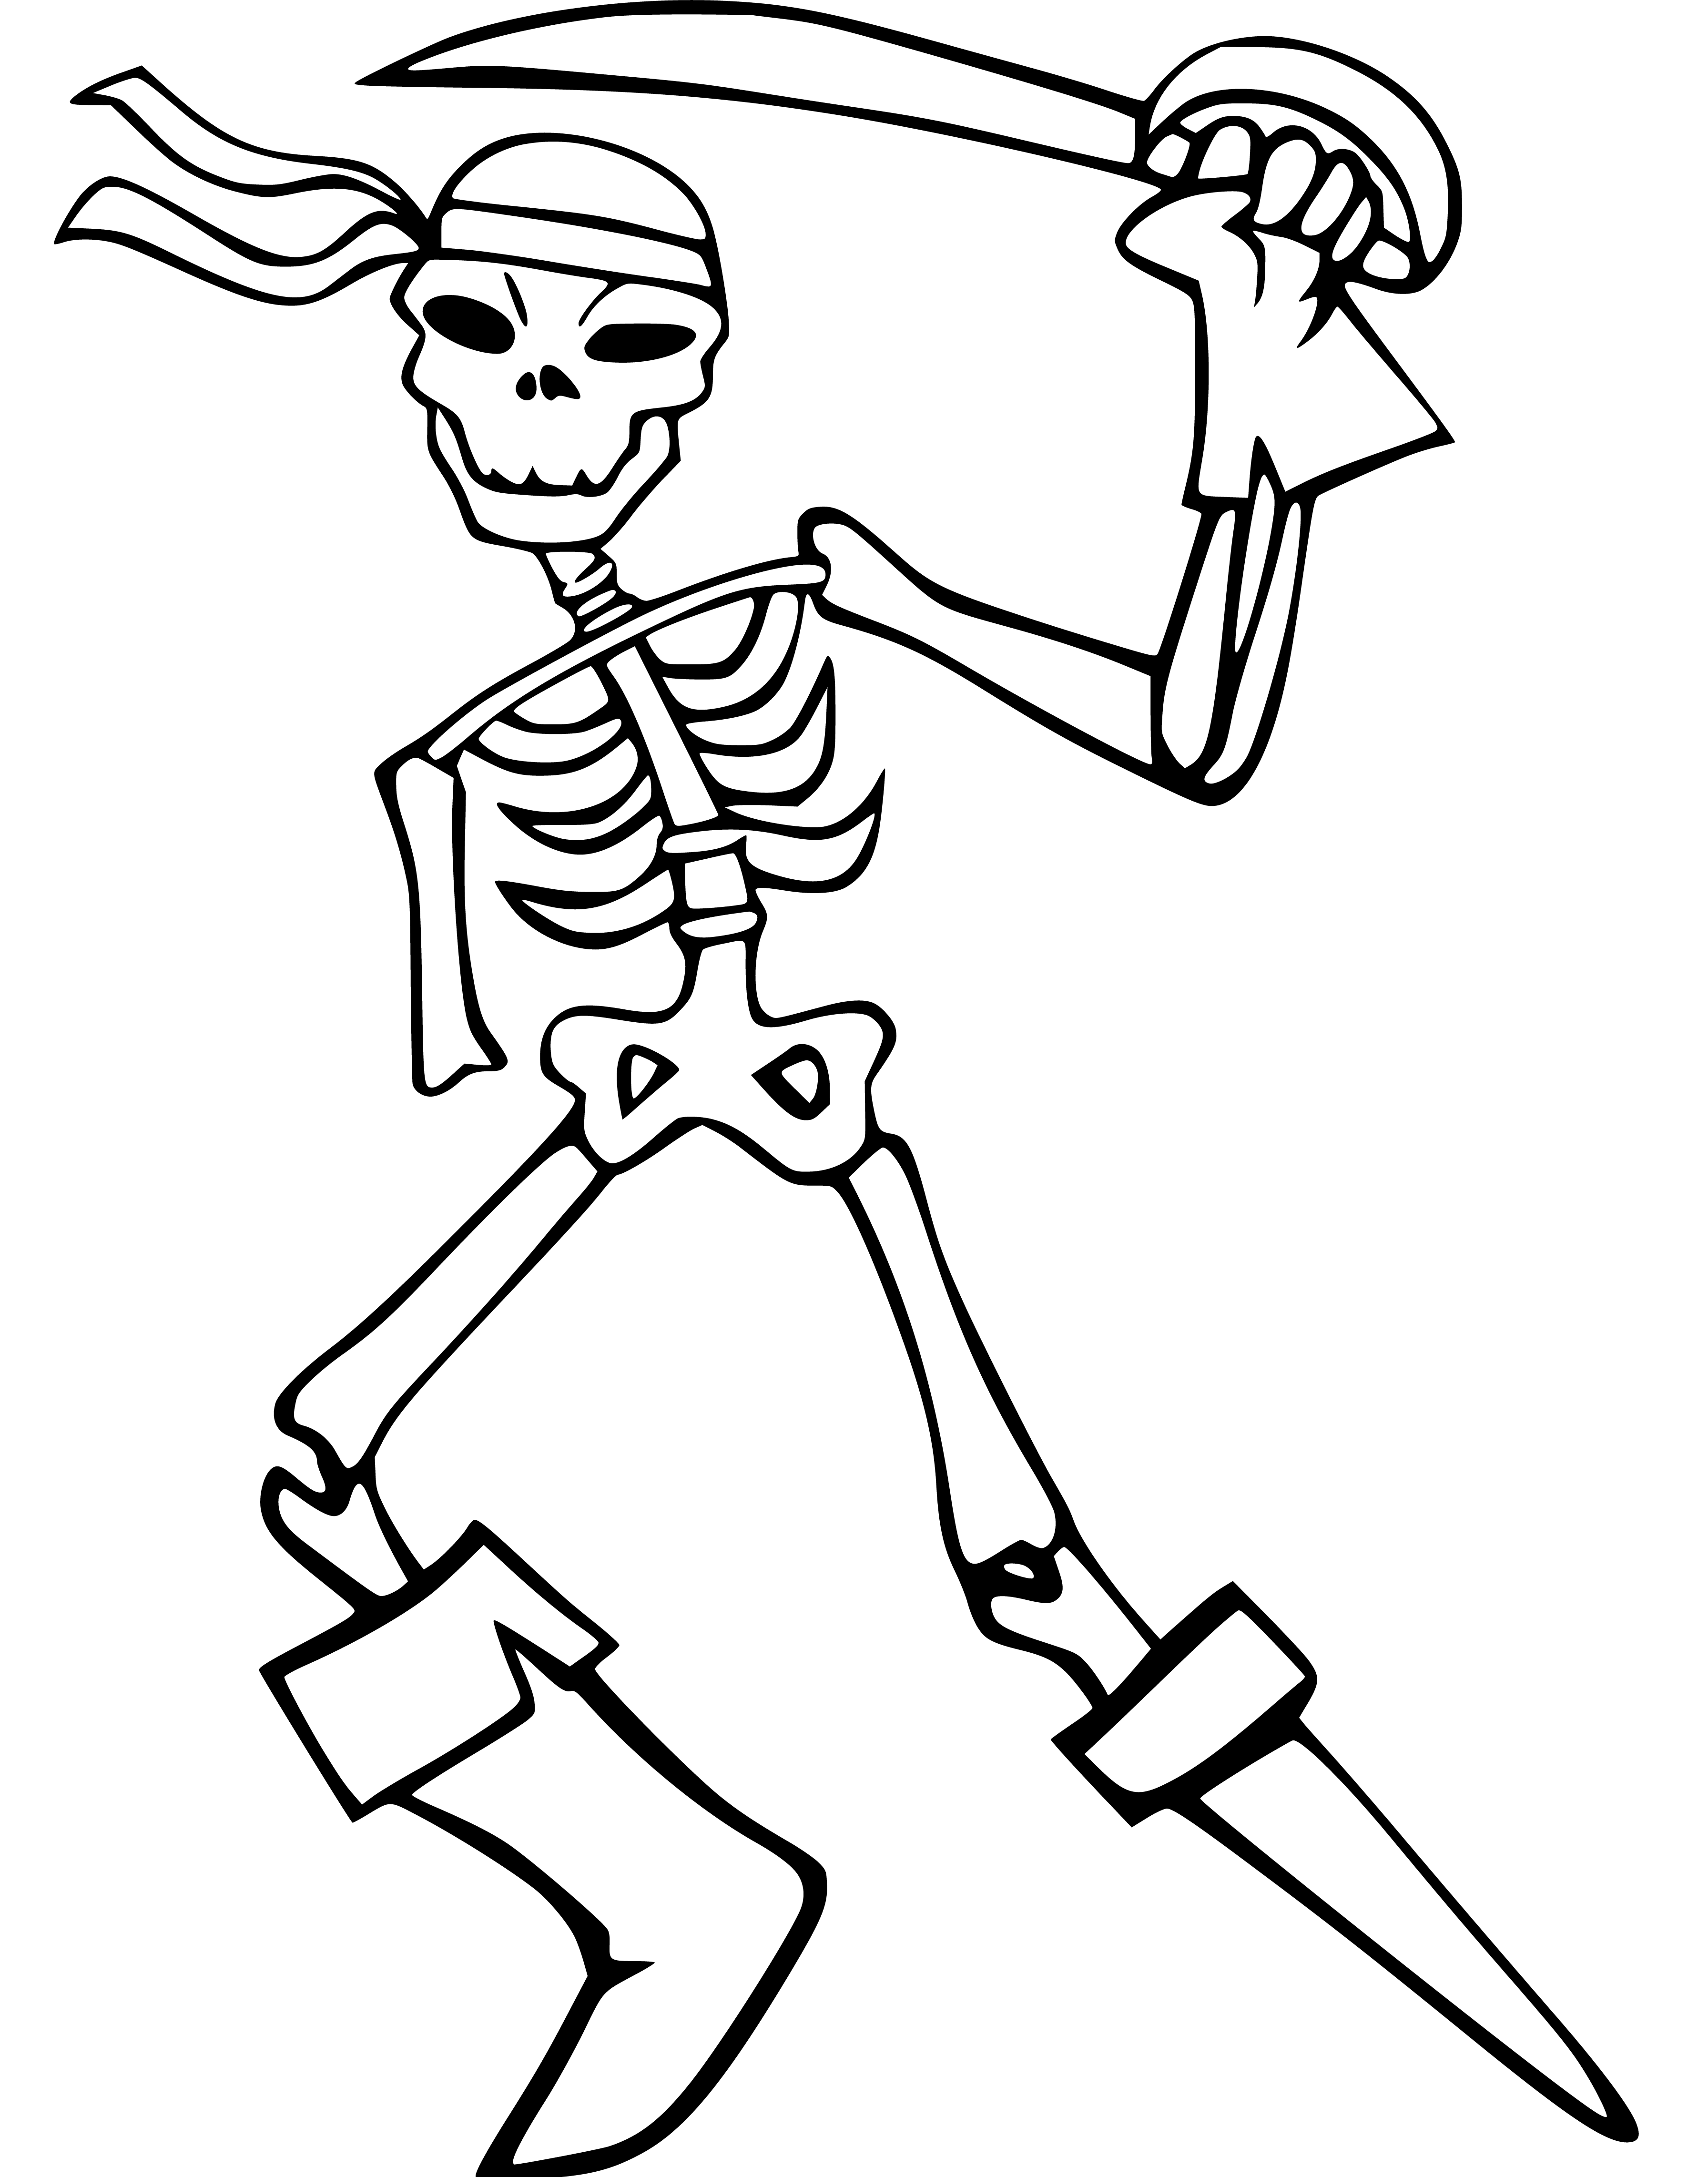 Skeleton Pirate Coloring Pages for Kids to Print - SheetalColor.com